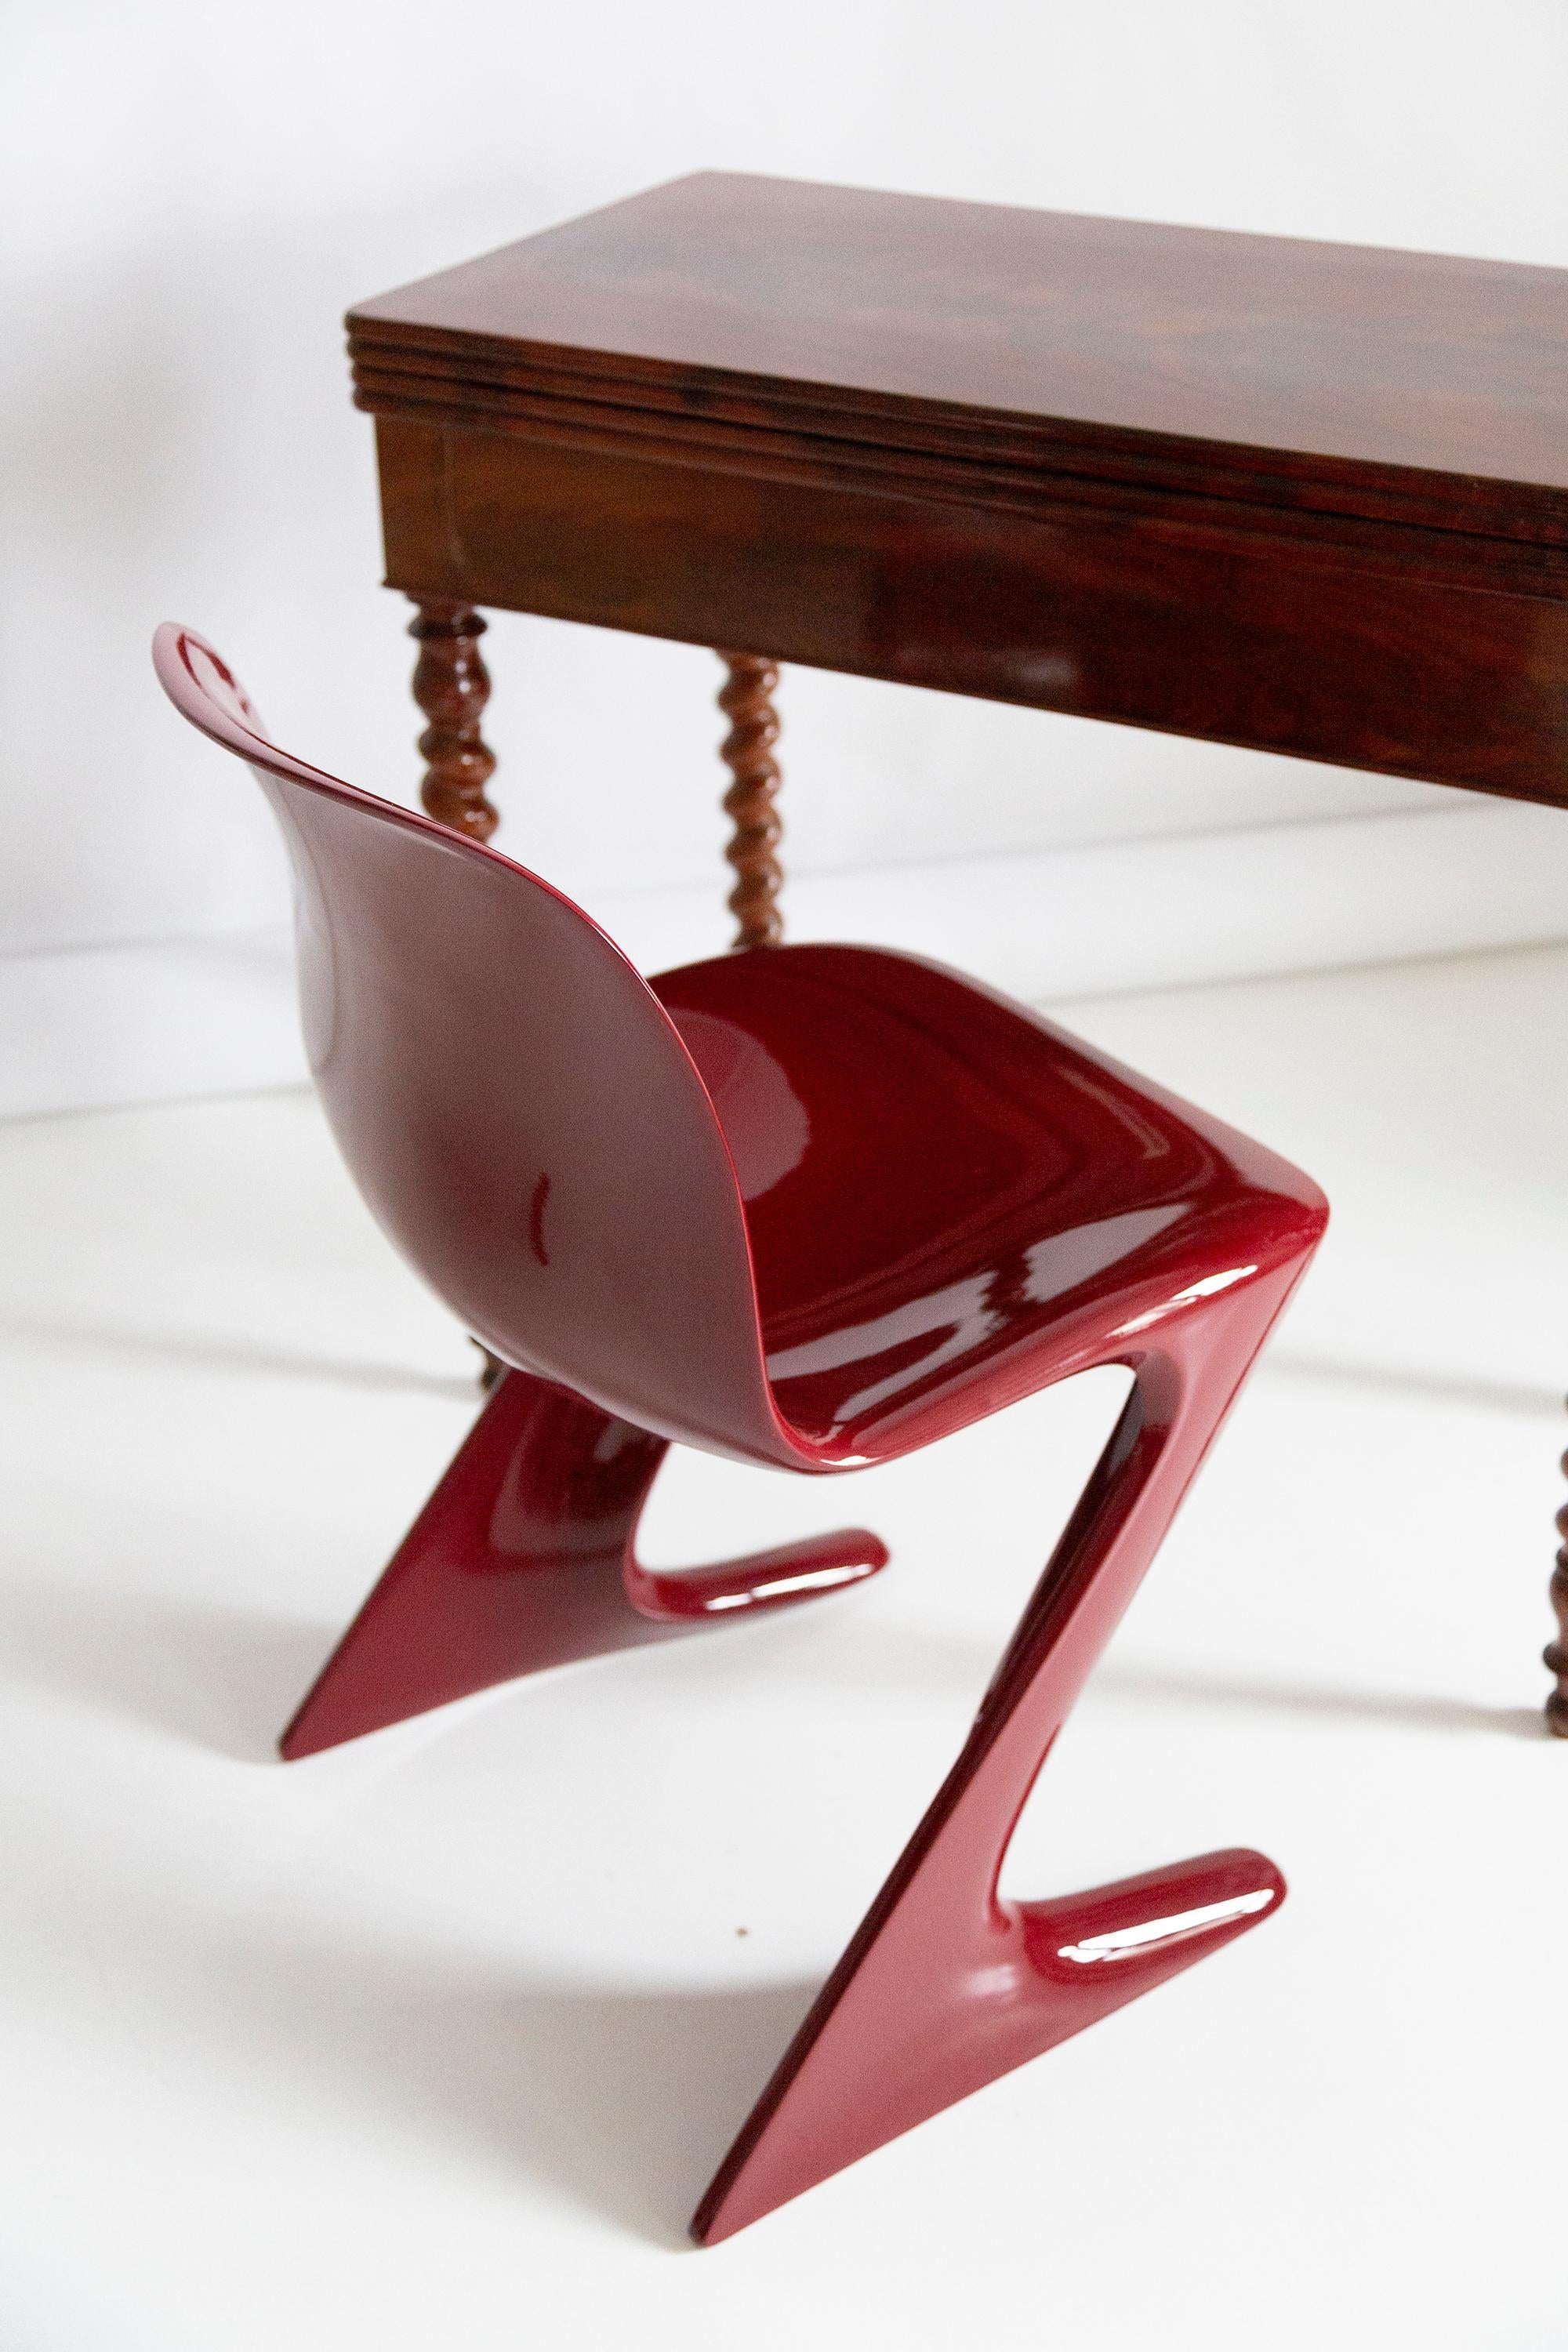 Pair of Dark Red Wine Kangaroo Chairs Designed by Ernst Moeckl, Germany, 1968 For Sale 7